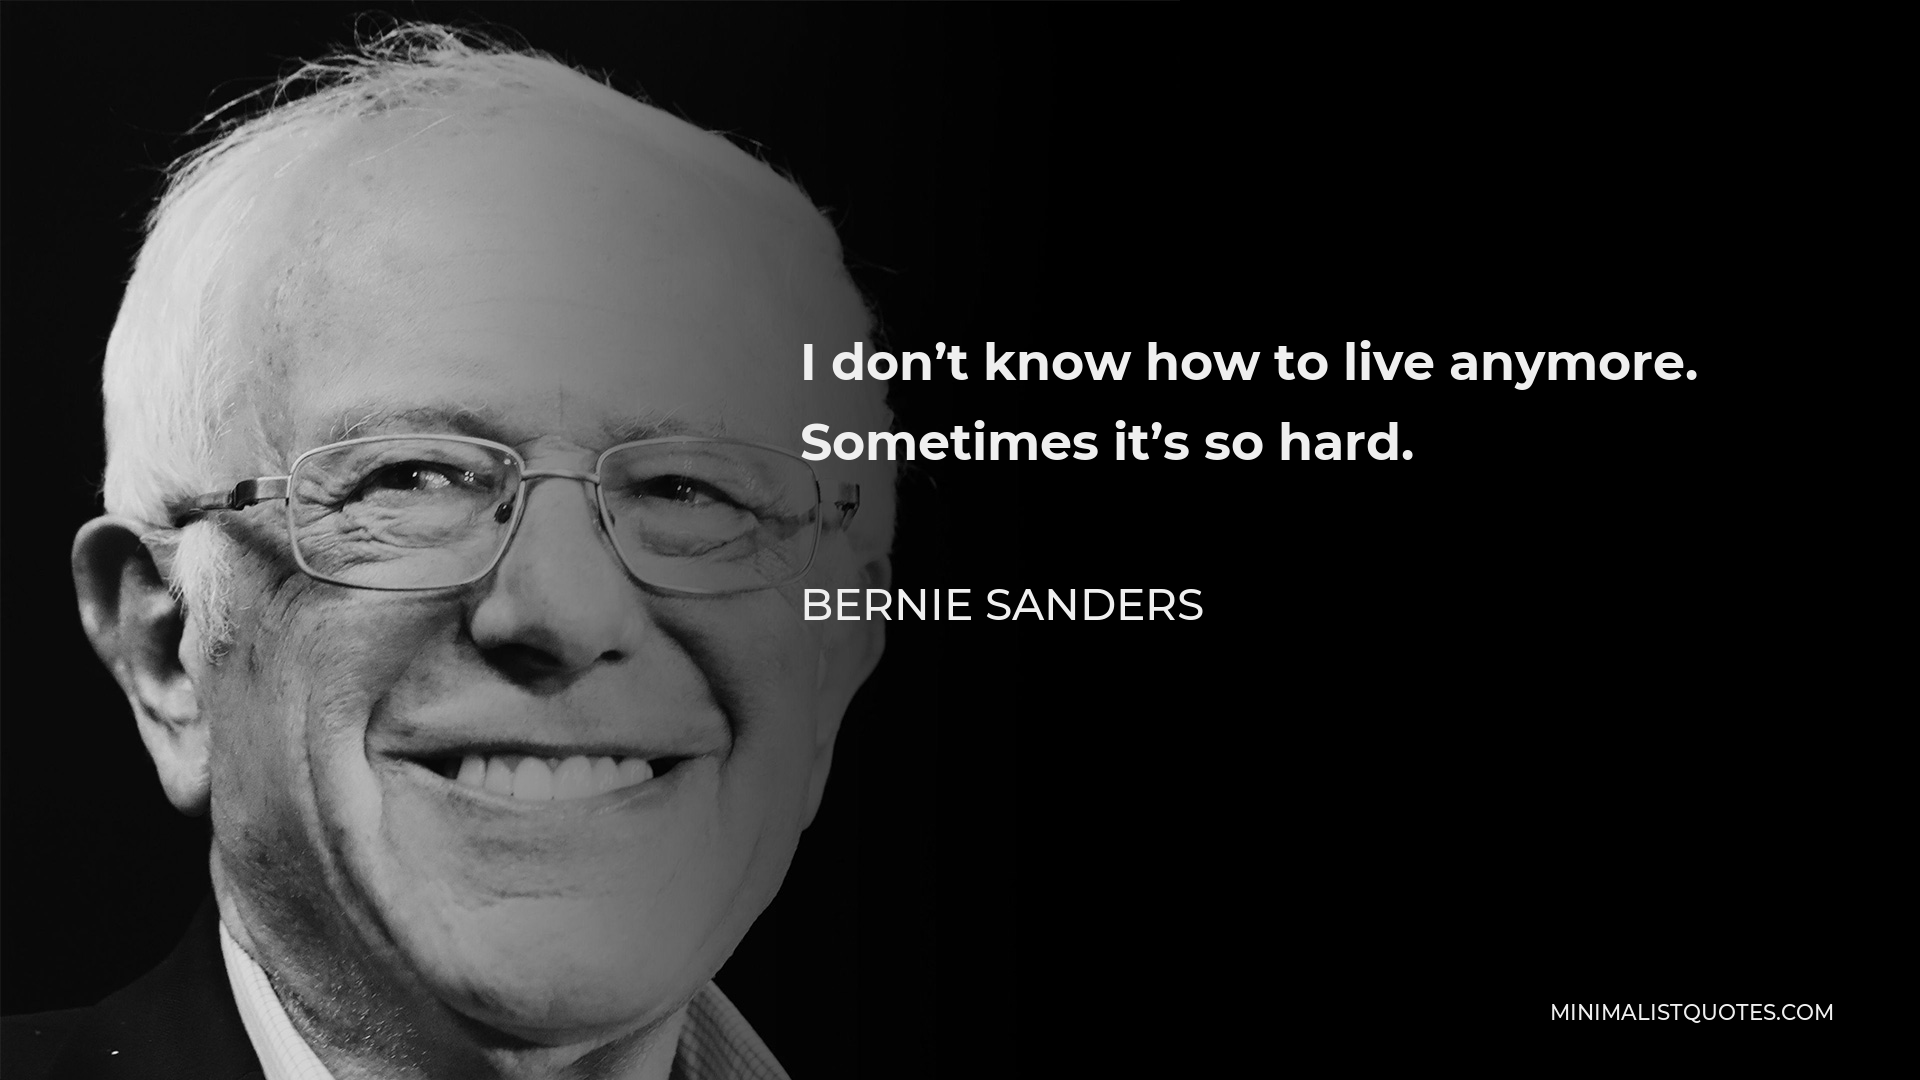 Bernie Sanders Quote - I don’t know how to live anymore. Sometimes it’s so hard.